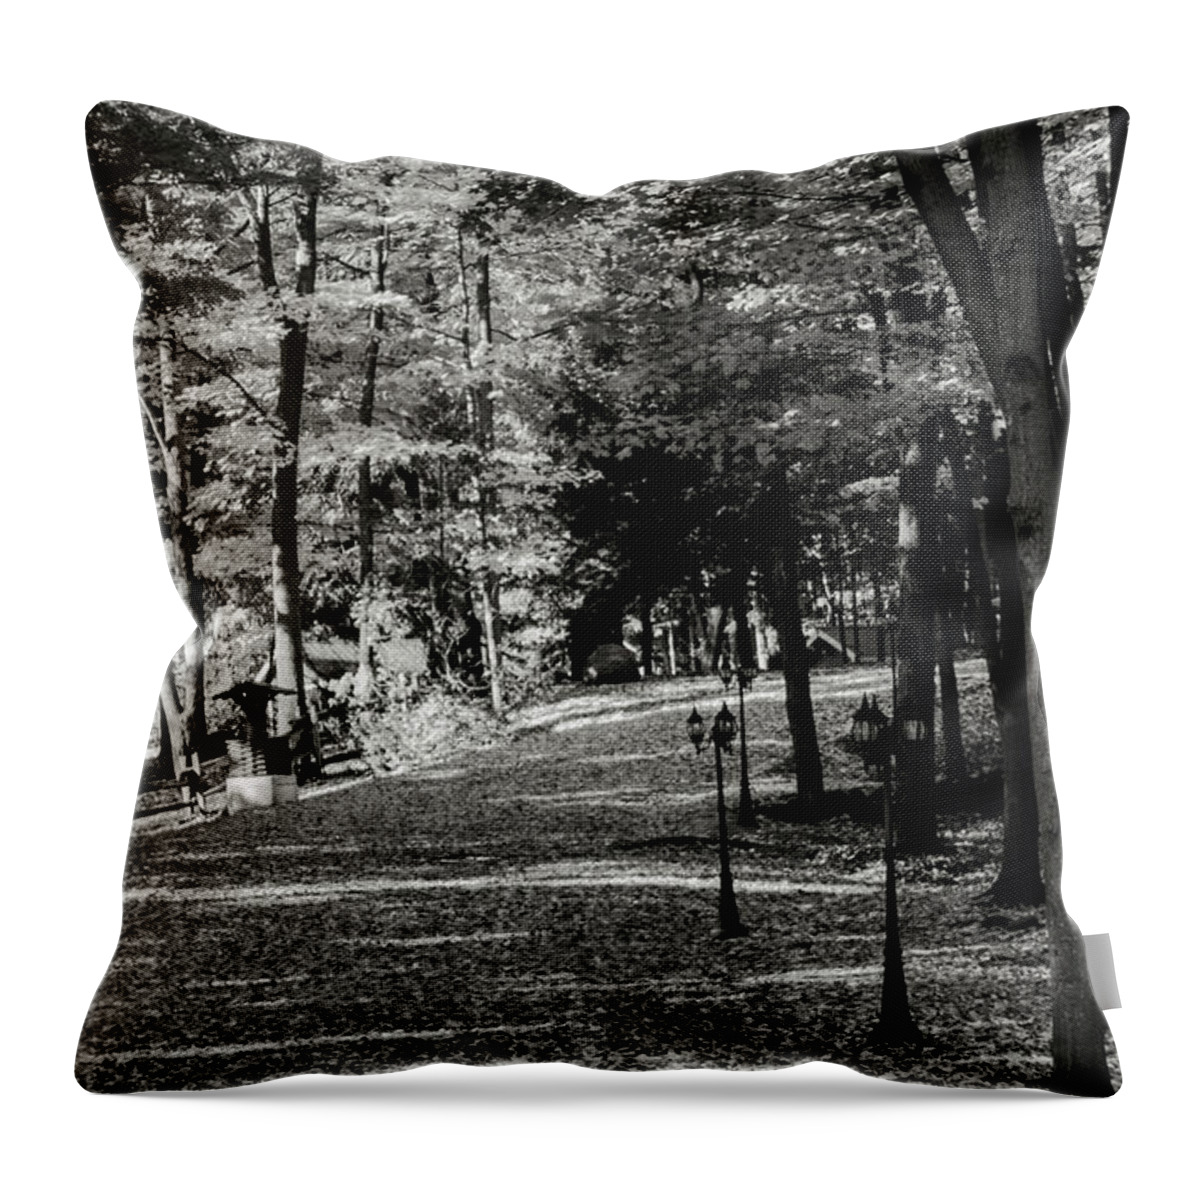 Fallen Throw Pillow featuring the photograph Fallen leaves. by James Canning